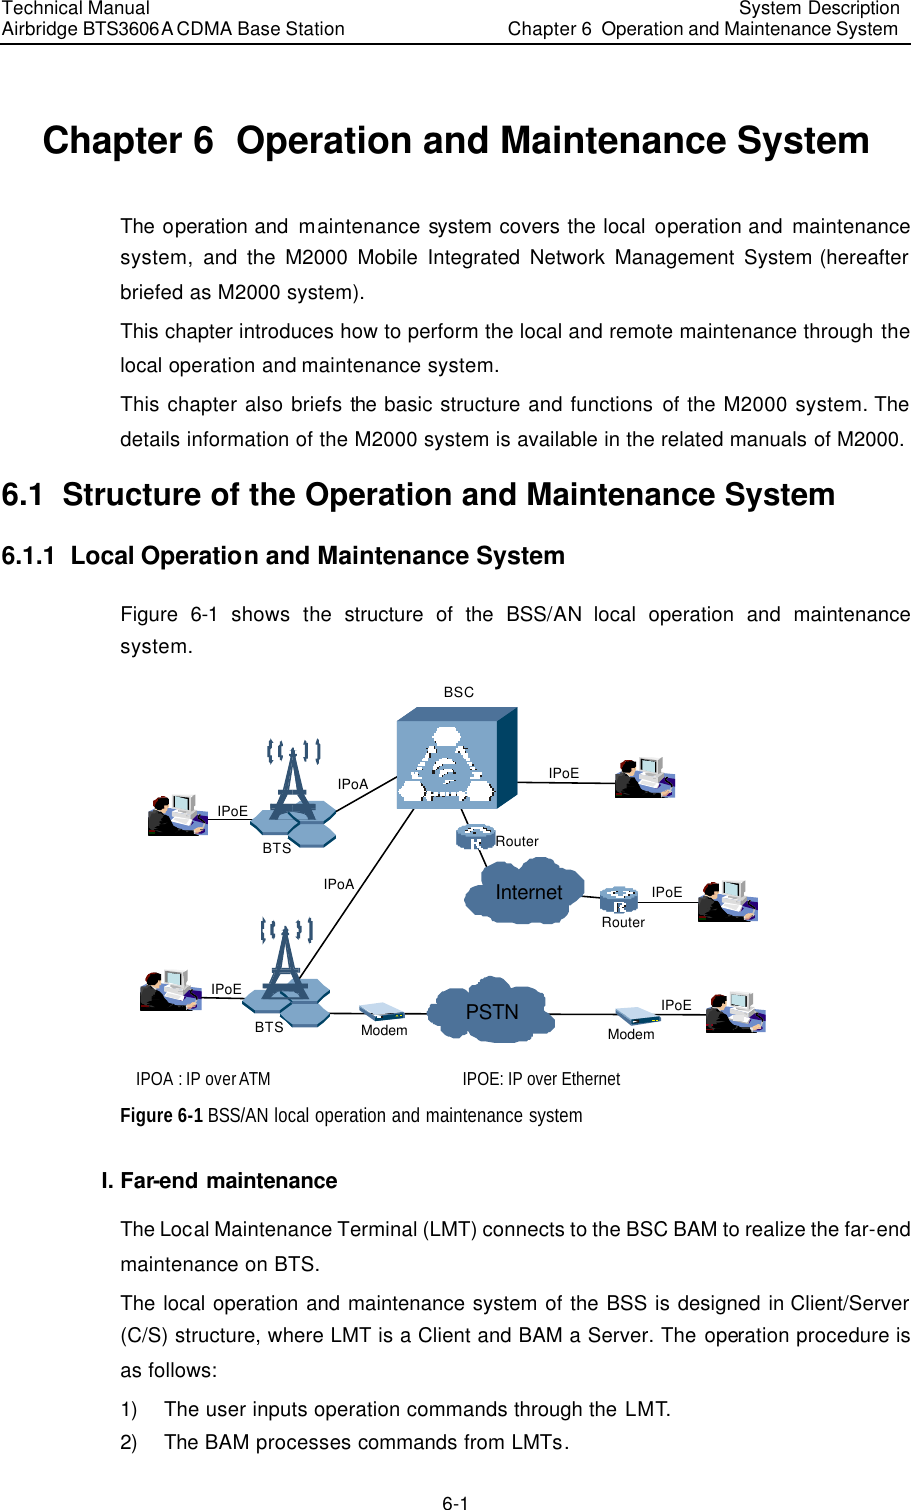 Technical Manual Airbridge BTS3606A CDMA Base Station System Description Chapter 6  Operation and Maintenance System   6-1 Chapter 6  Operation and Maintenance System The operation and maintenance system covers the local operation and maintenance system, and the M2000 Mobile Integrated Network Management System (hereafter briefed as M2000 system).  This chapter introduces how to perform the local and remote maintenance through the local operation and maintenance system.  This chapter also briefs the basic structure and functions of the M2000 system. The details information of the M2000 system is available in the related manuals of M2000. 6.1  Structure of the Operation and Maintenance System 6.1.1  Local Operation and Maintenance System Figure 6-1 shows the structure of the BSS/AN local operation and maintenance system. PSTNInternetIPoEIPoAIPoARouterModemIPoEIPoEIPoERouterModemIPoEBSCBTSBTS IPOA : IP over ATM IPOE: IP over Ethernet Figure 6-1 BSS/AN local operation and maintenance system I. Far-end maintenance The Local Maintenance Terminal (LMT) connects to the BSC BAM to realize the far-end maintenance on BTS. The local operation and maintenance system of the BSS is designed in Client/Server (C/S) structure, where LMT is a Client and BAM a Server. The operation procedure is as follows: 1) The user inputs operation commands through the LMT. 2) The BAM processes commands from LMTs. 